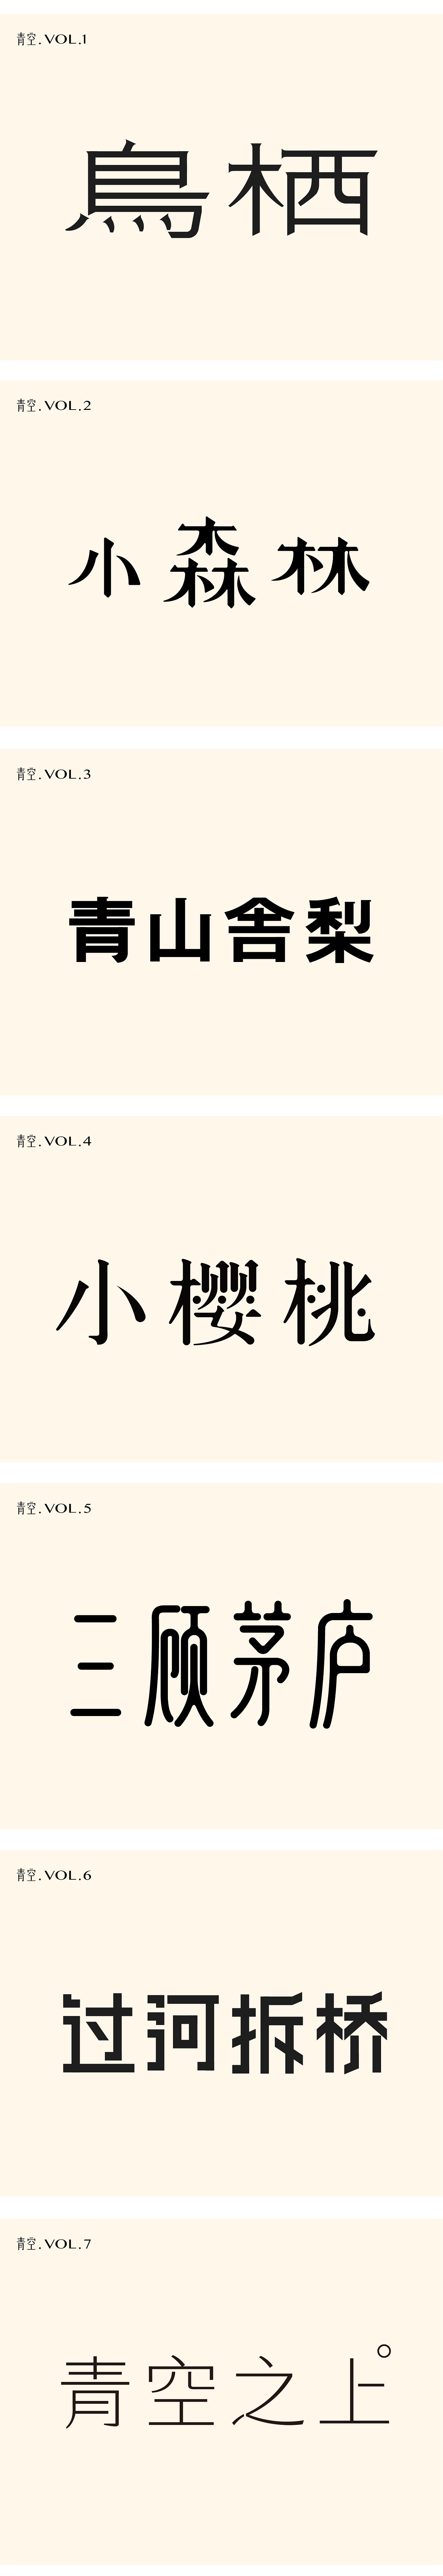 Chinese Creative Font Design-February 2020 Font Design Collection III